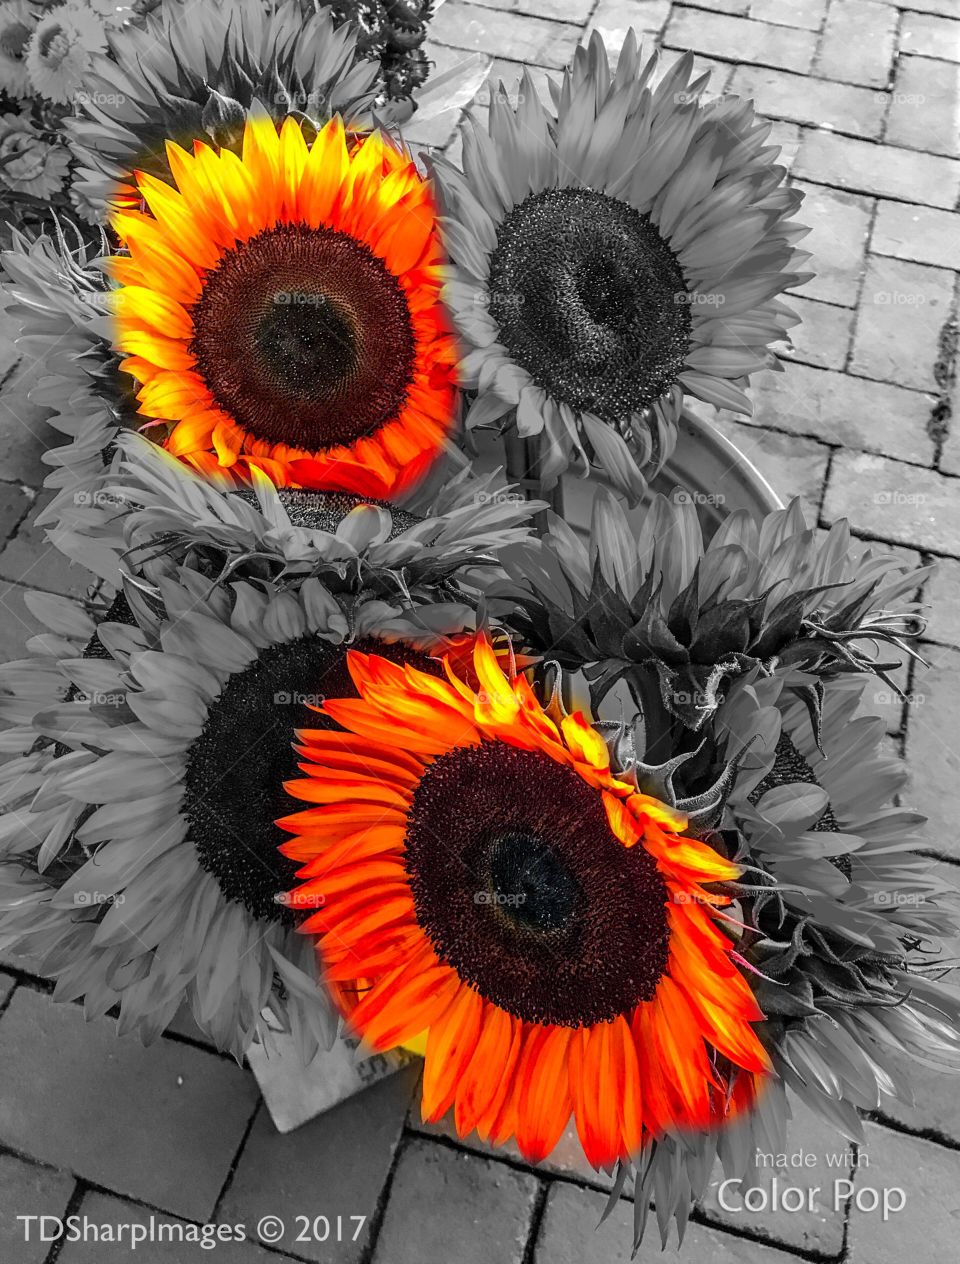 Sunflowers - Colorized 